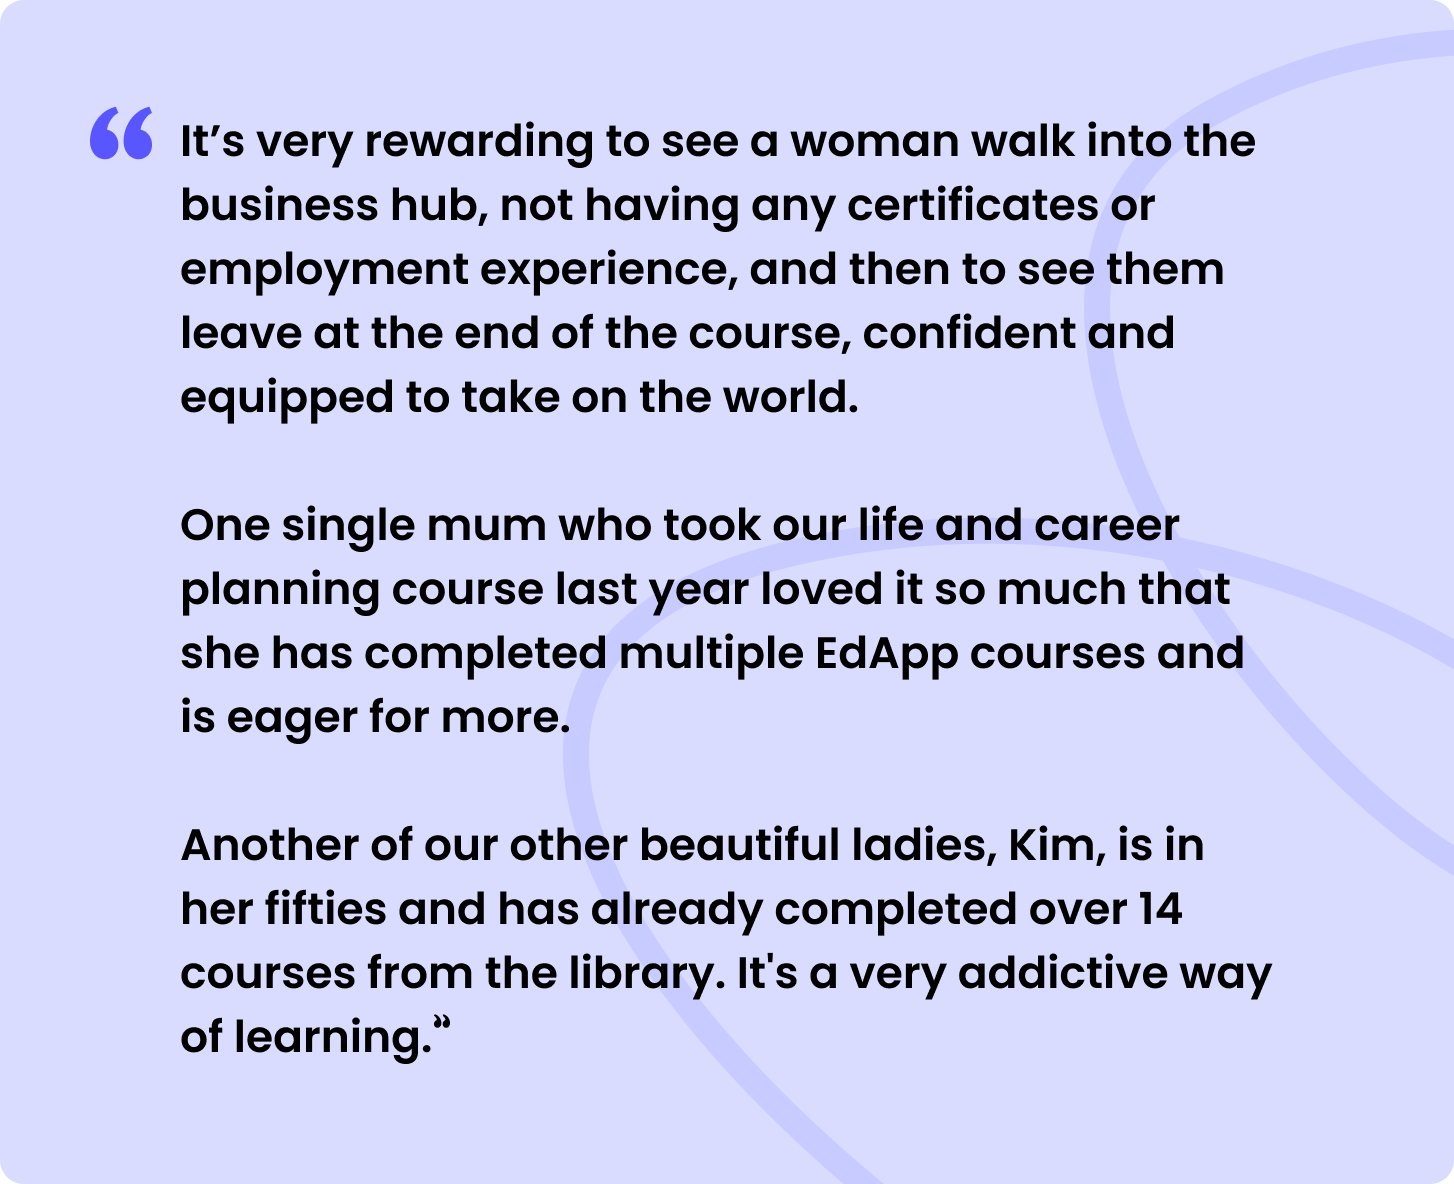 It’s very rewarding to see a woman walk into the business hub, not having any certificates or employment experience, and then to see them leave at the end of the course, confident and equipped to take on the world.
One single mum who took our life and career planning course last year loved it so much that she has completed multiple SC Training (formerly EdApp) courses and is eager for more.
Another of our other beautiful ladies, Kim, is in her fifties and has already completed over 14 courses from the library. It's a very addictive way of learning."